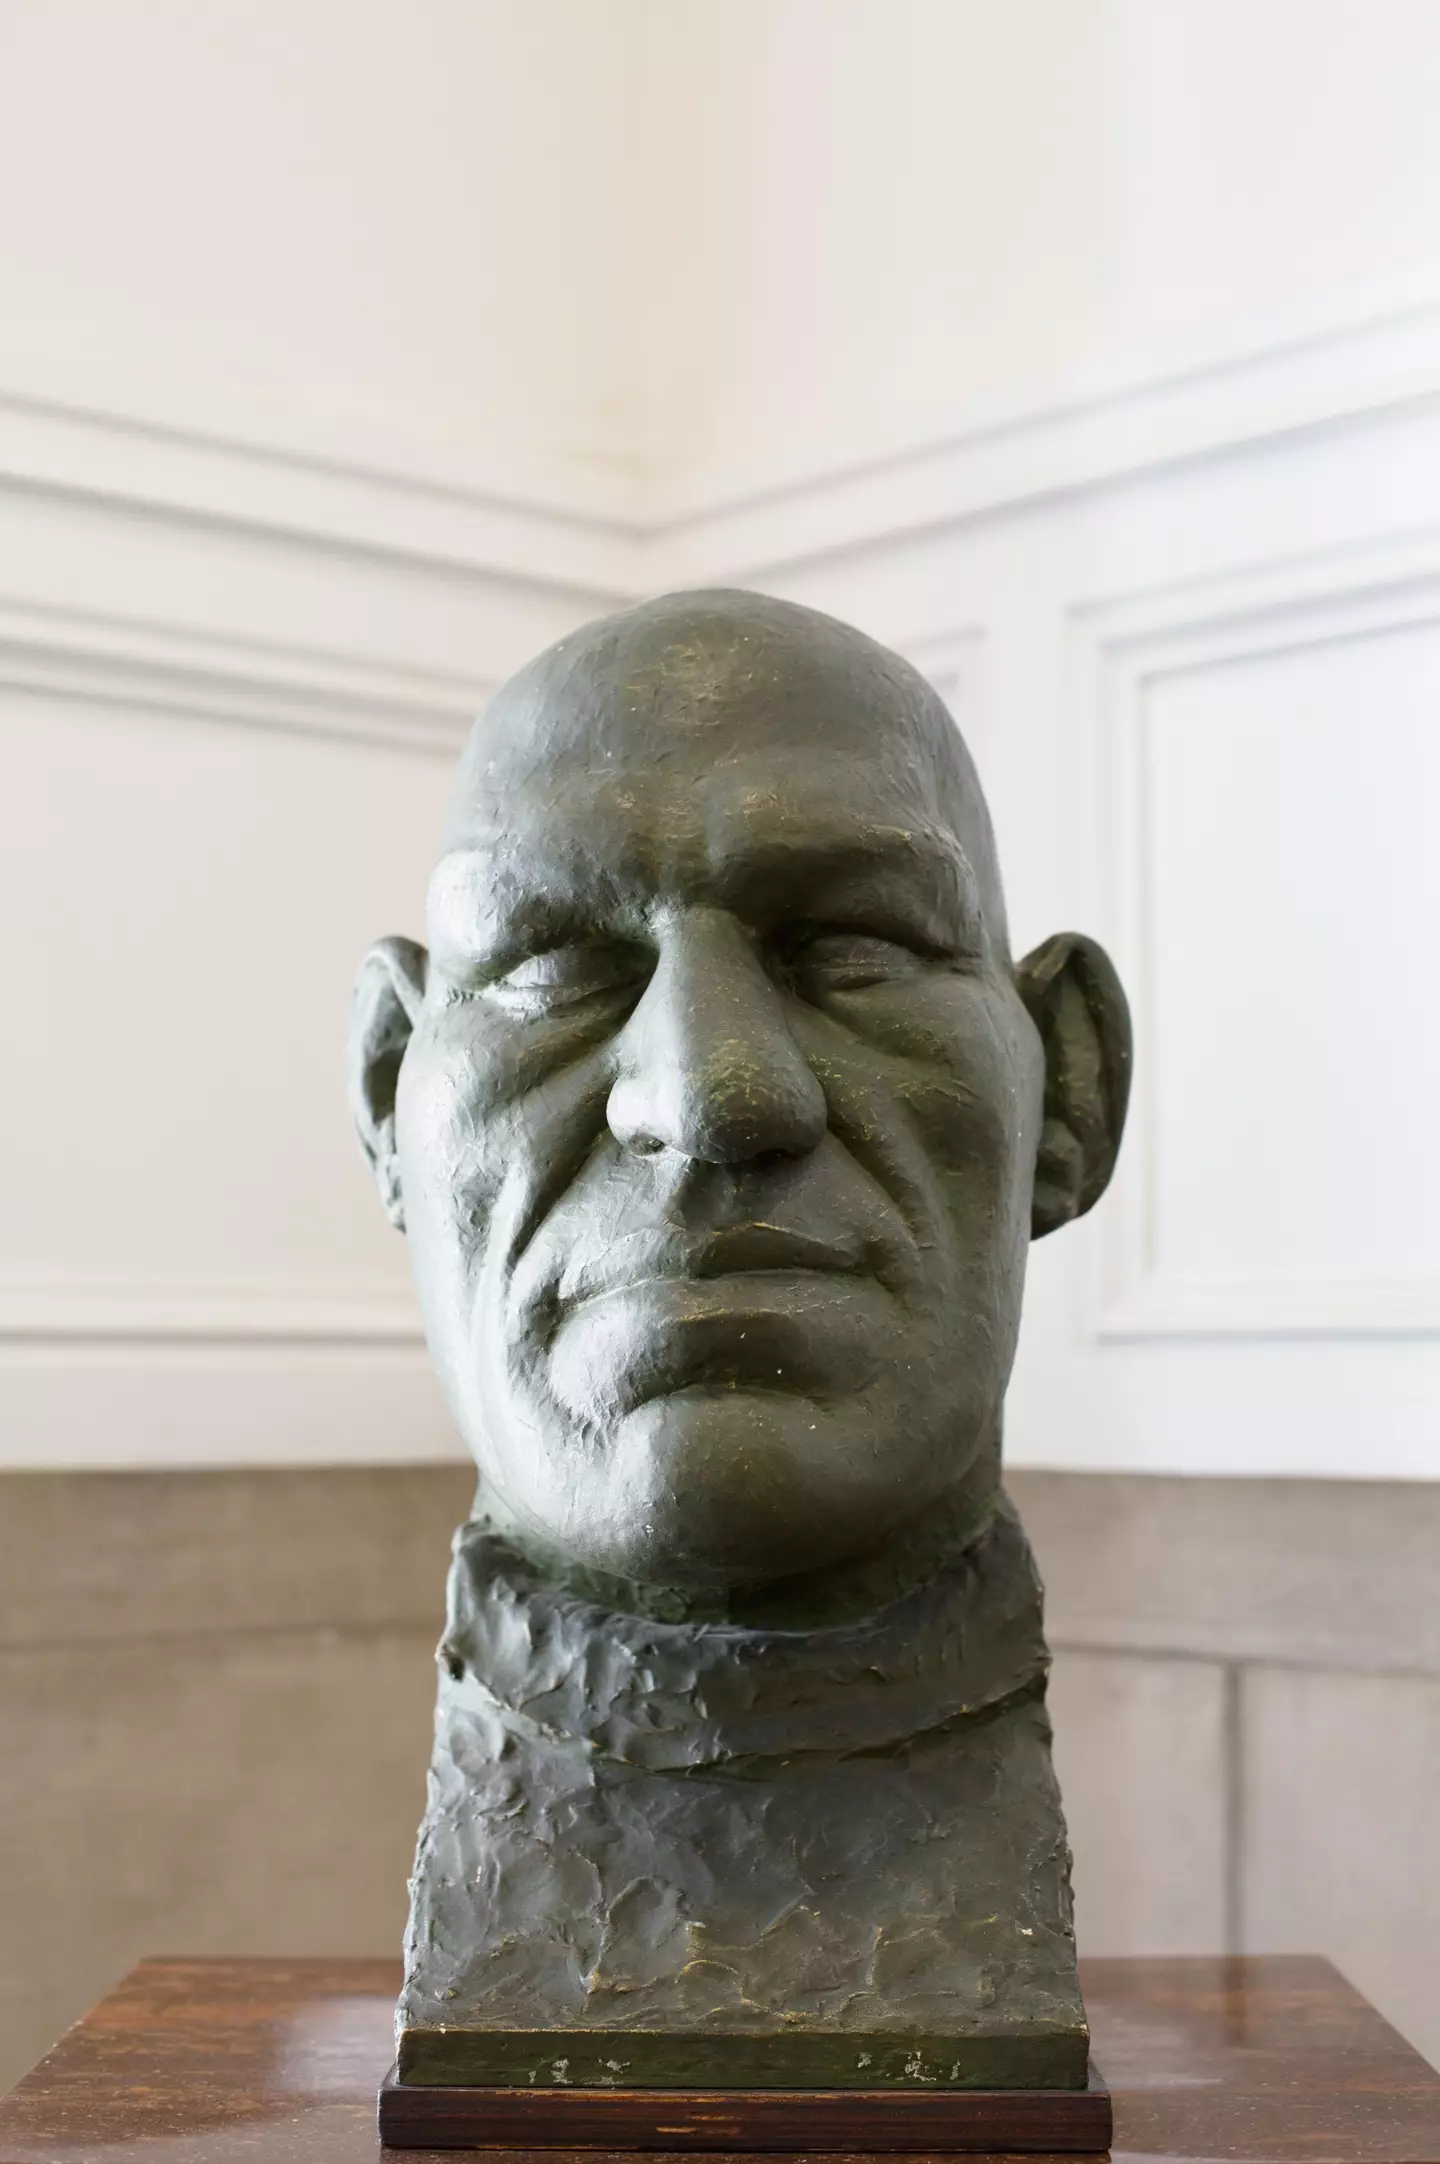 Maurice Tillet's bust is still in the International Museum of Surgical Science.